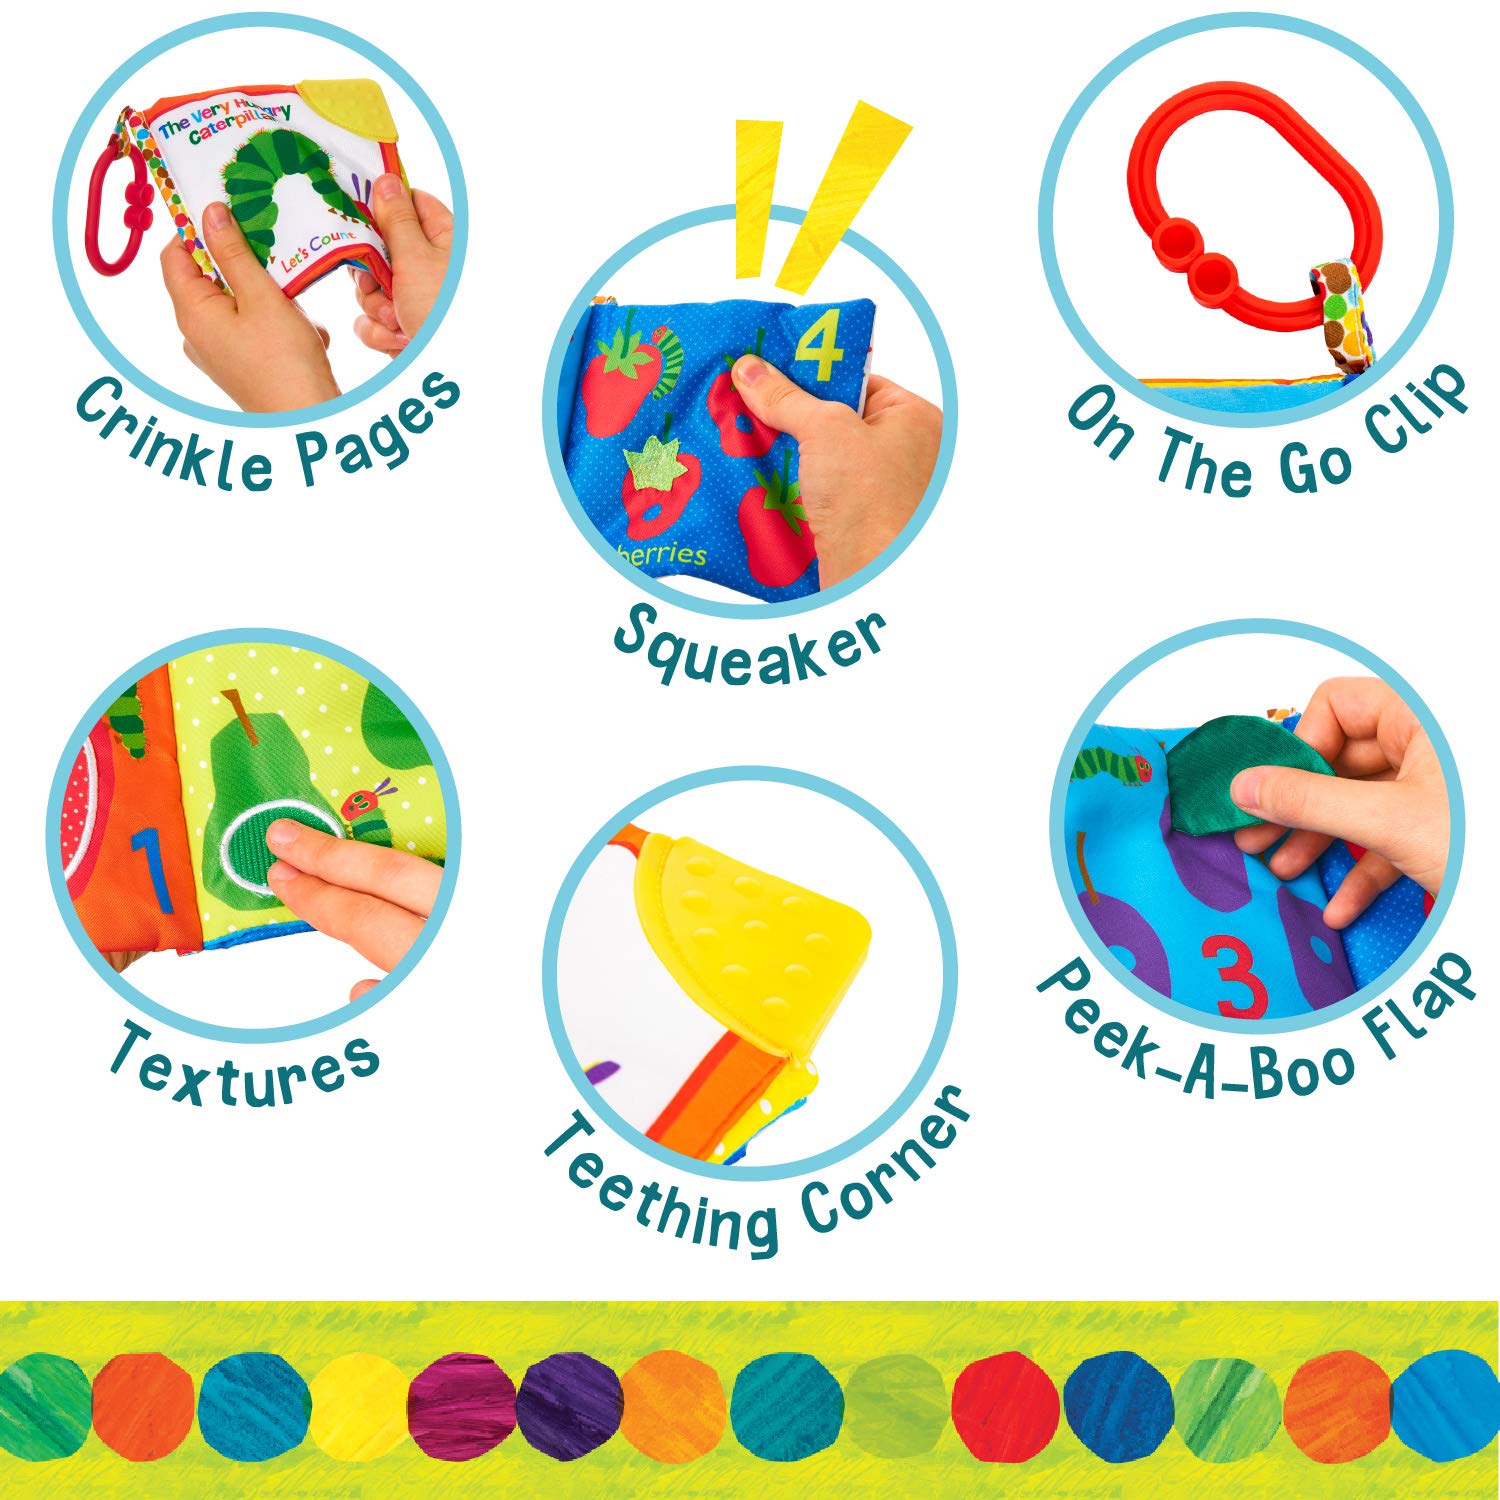 Let's Count Soft Book - World of Eric Carle The Very Hungry Caterpillar Baby Teething Crinkle Book